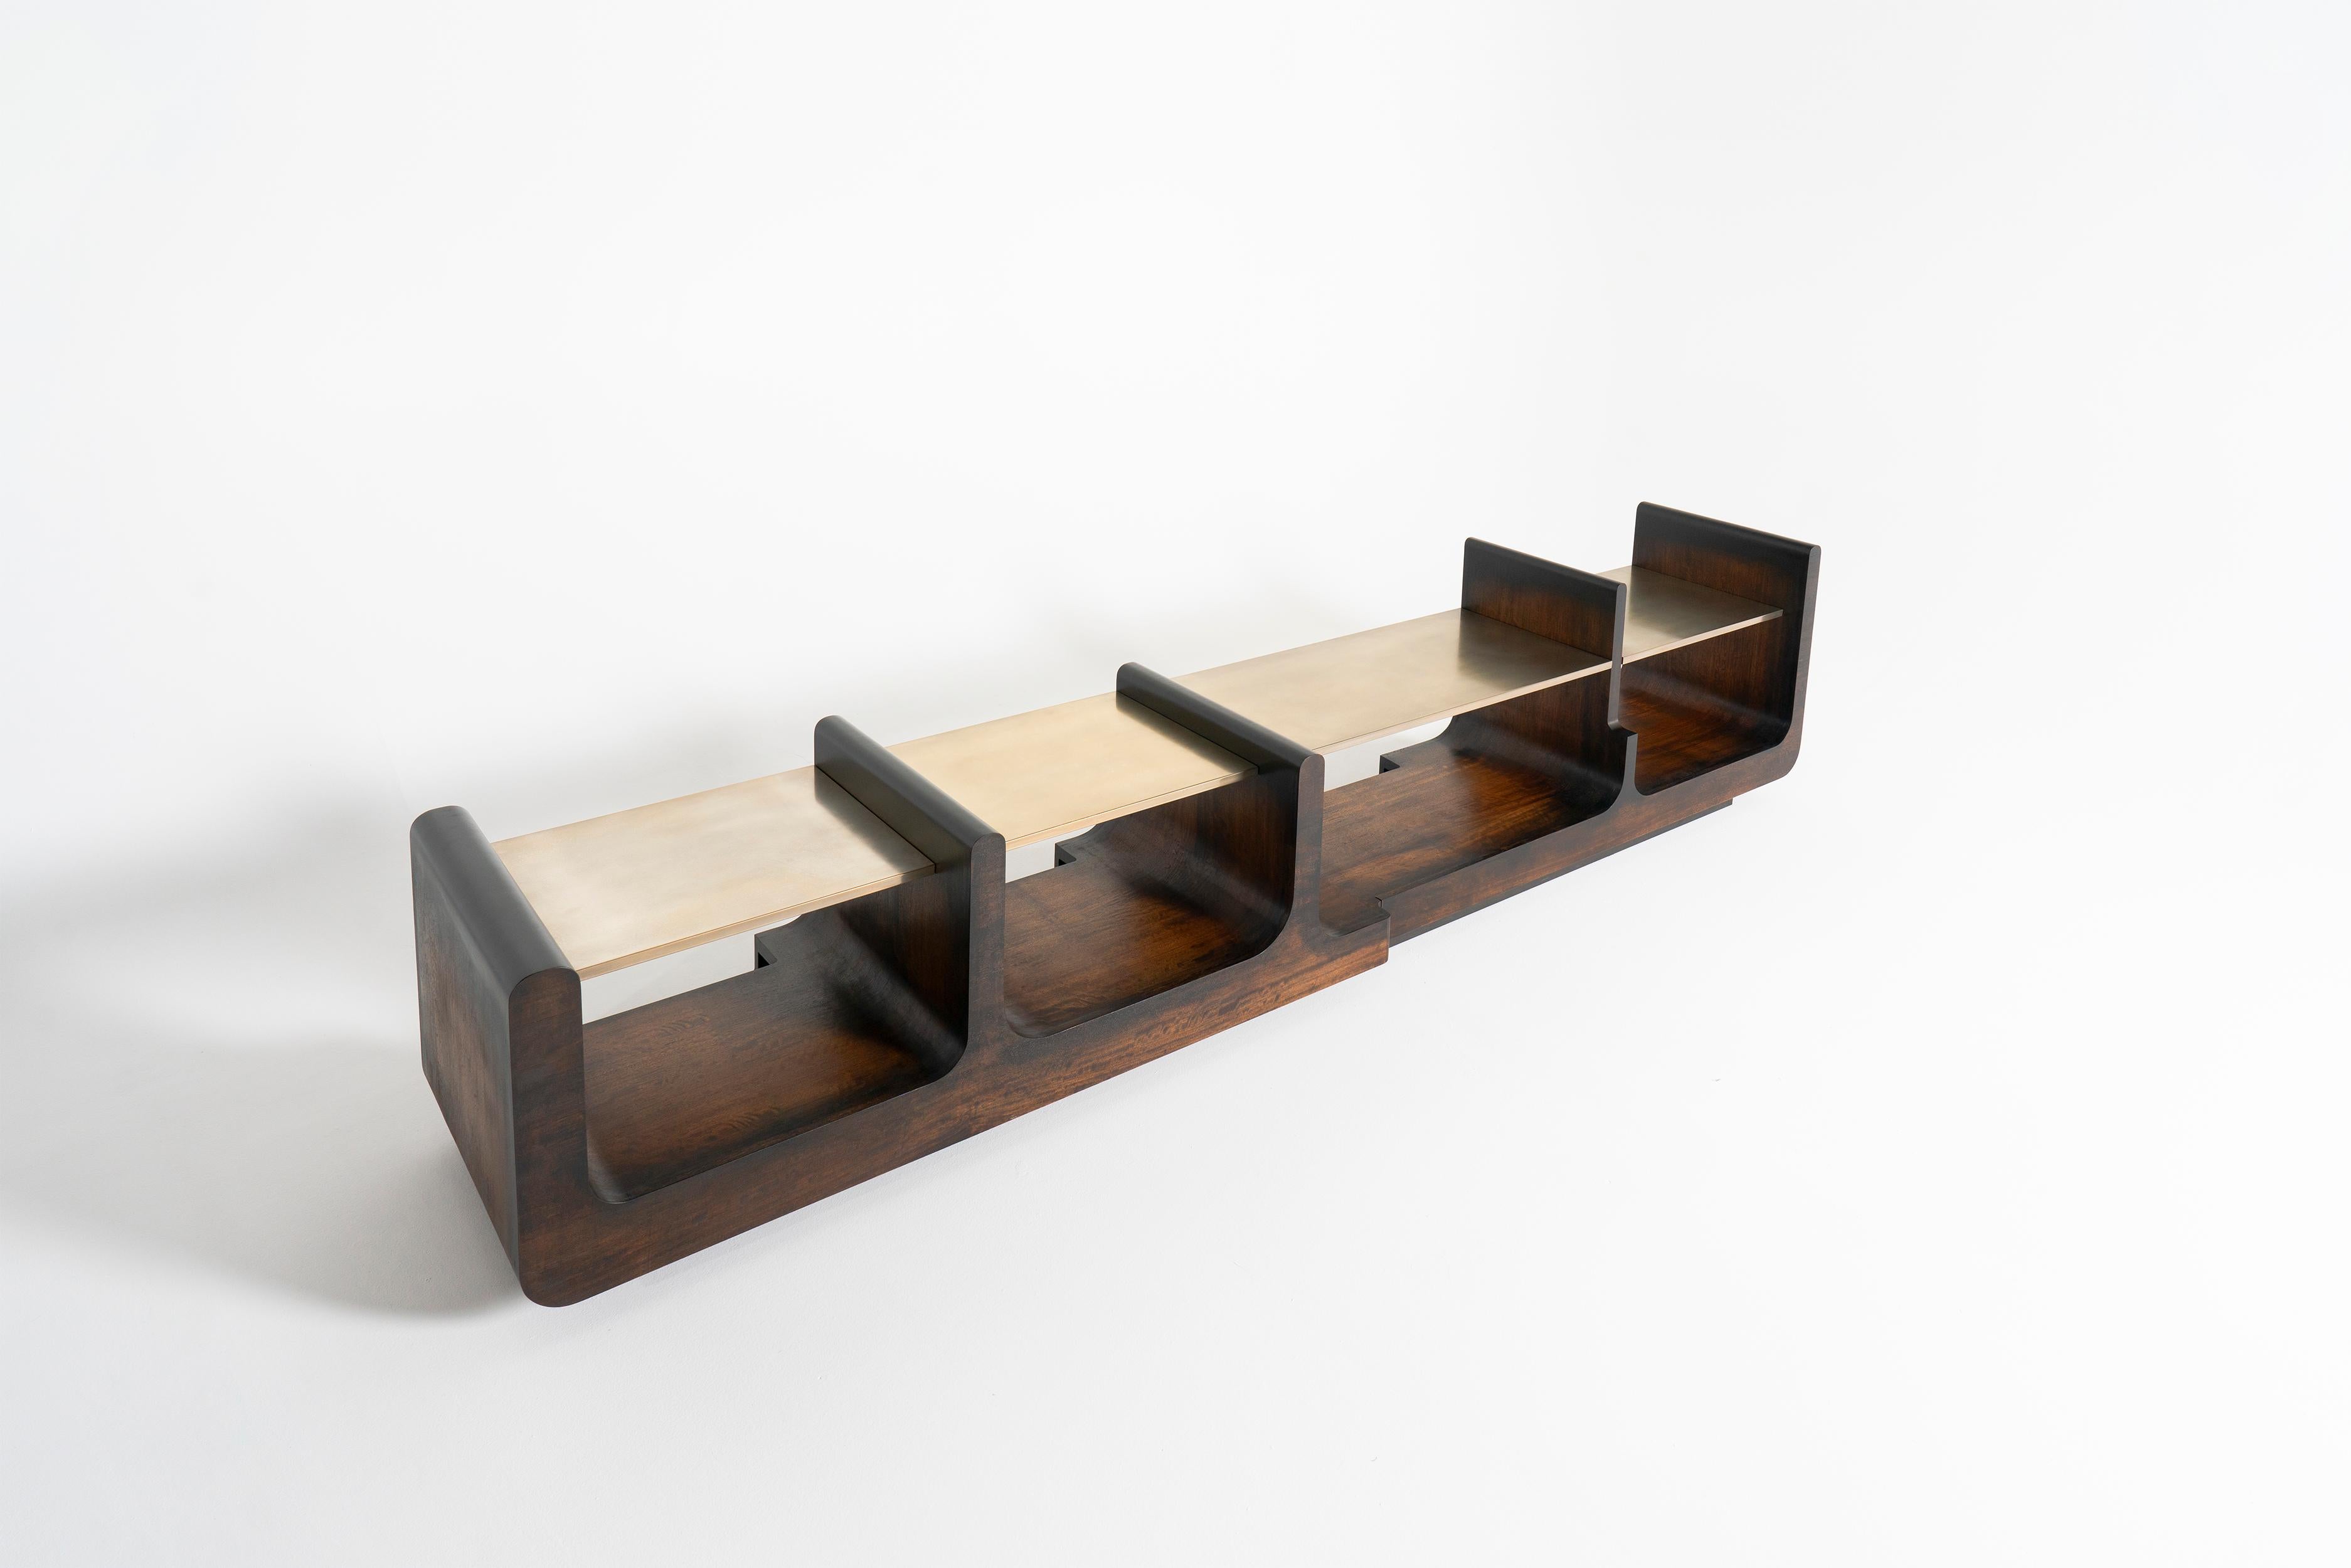 NOAH - 21st century modern Bespoke Audio sideboard in African walnut and brass

NOAH sideboard was actually designed with a mission to harbor particular audio devices for a customer. The final result evoked in us a memory of the Noah’s Ark, where